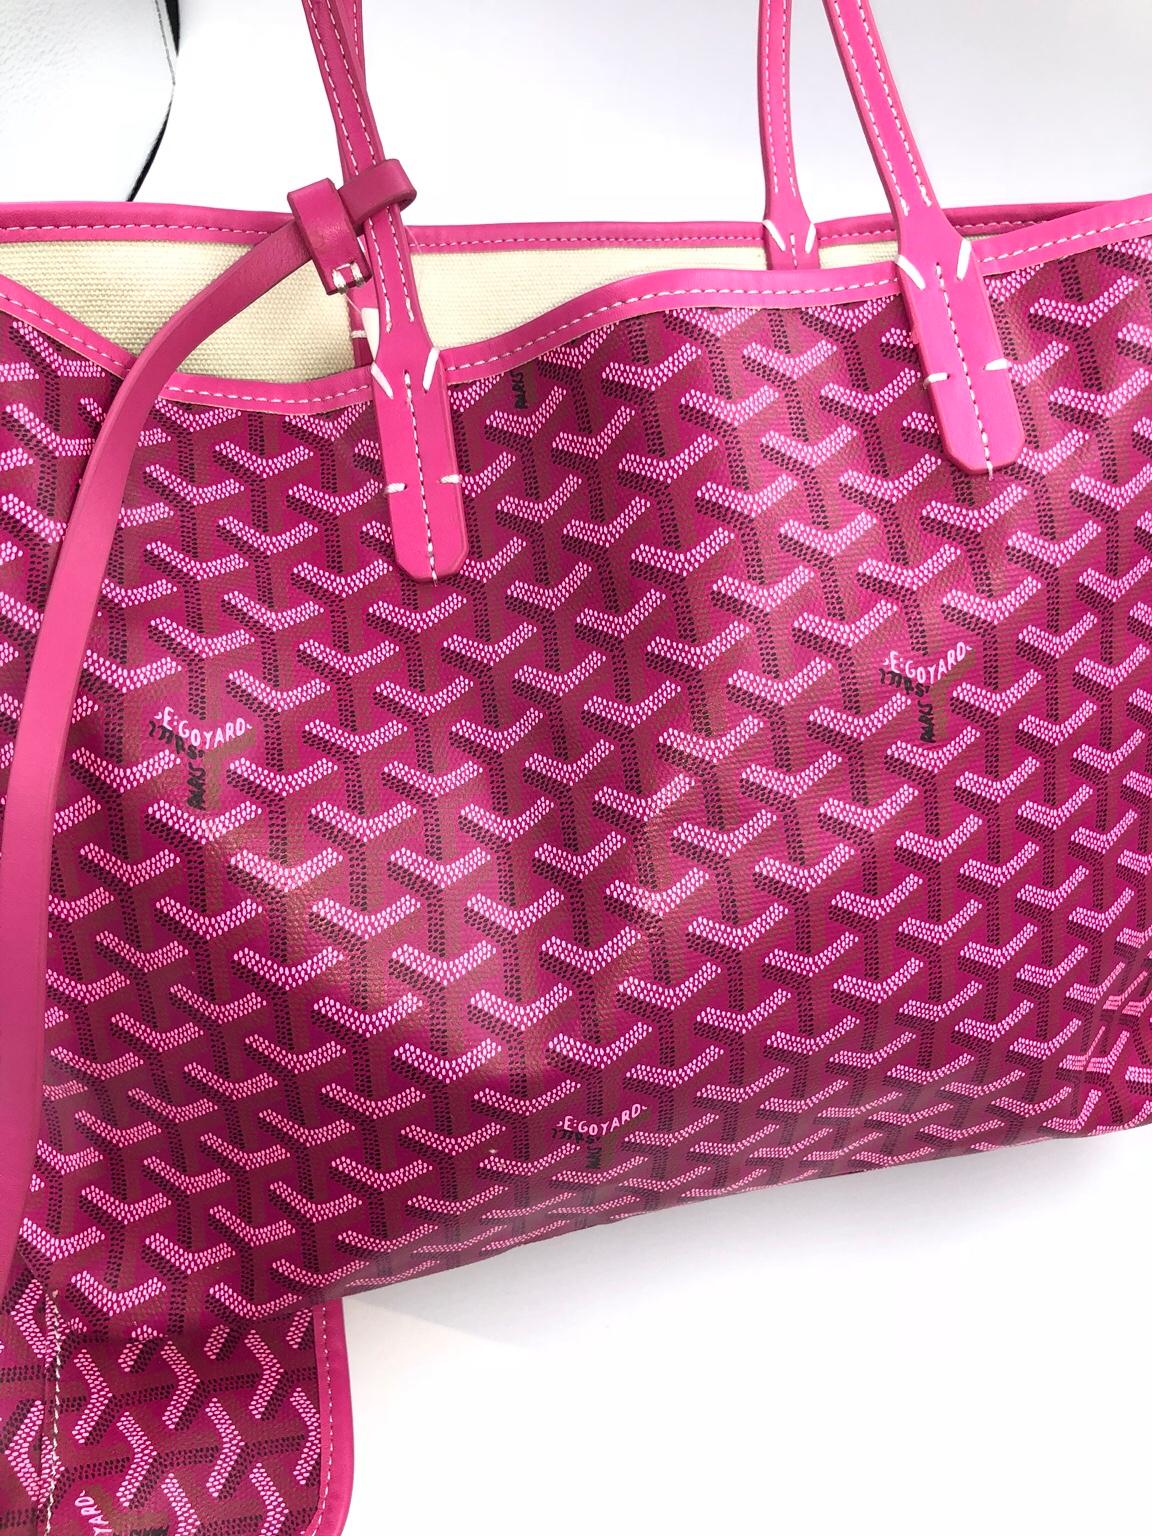 Hot Pink Goyard St Louis jumbo tote bag in SW13 Thames for £50.00 for sale | Shpock